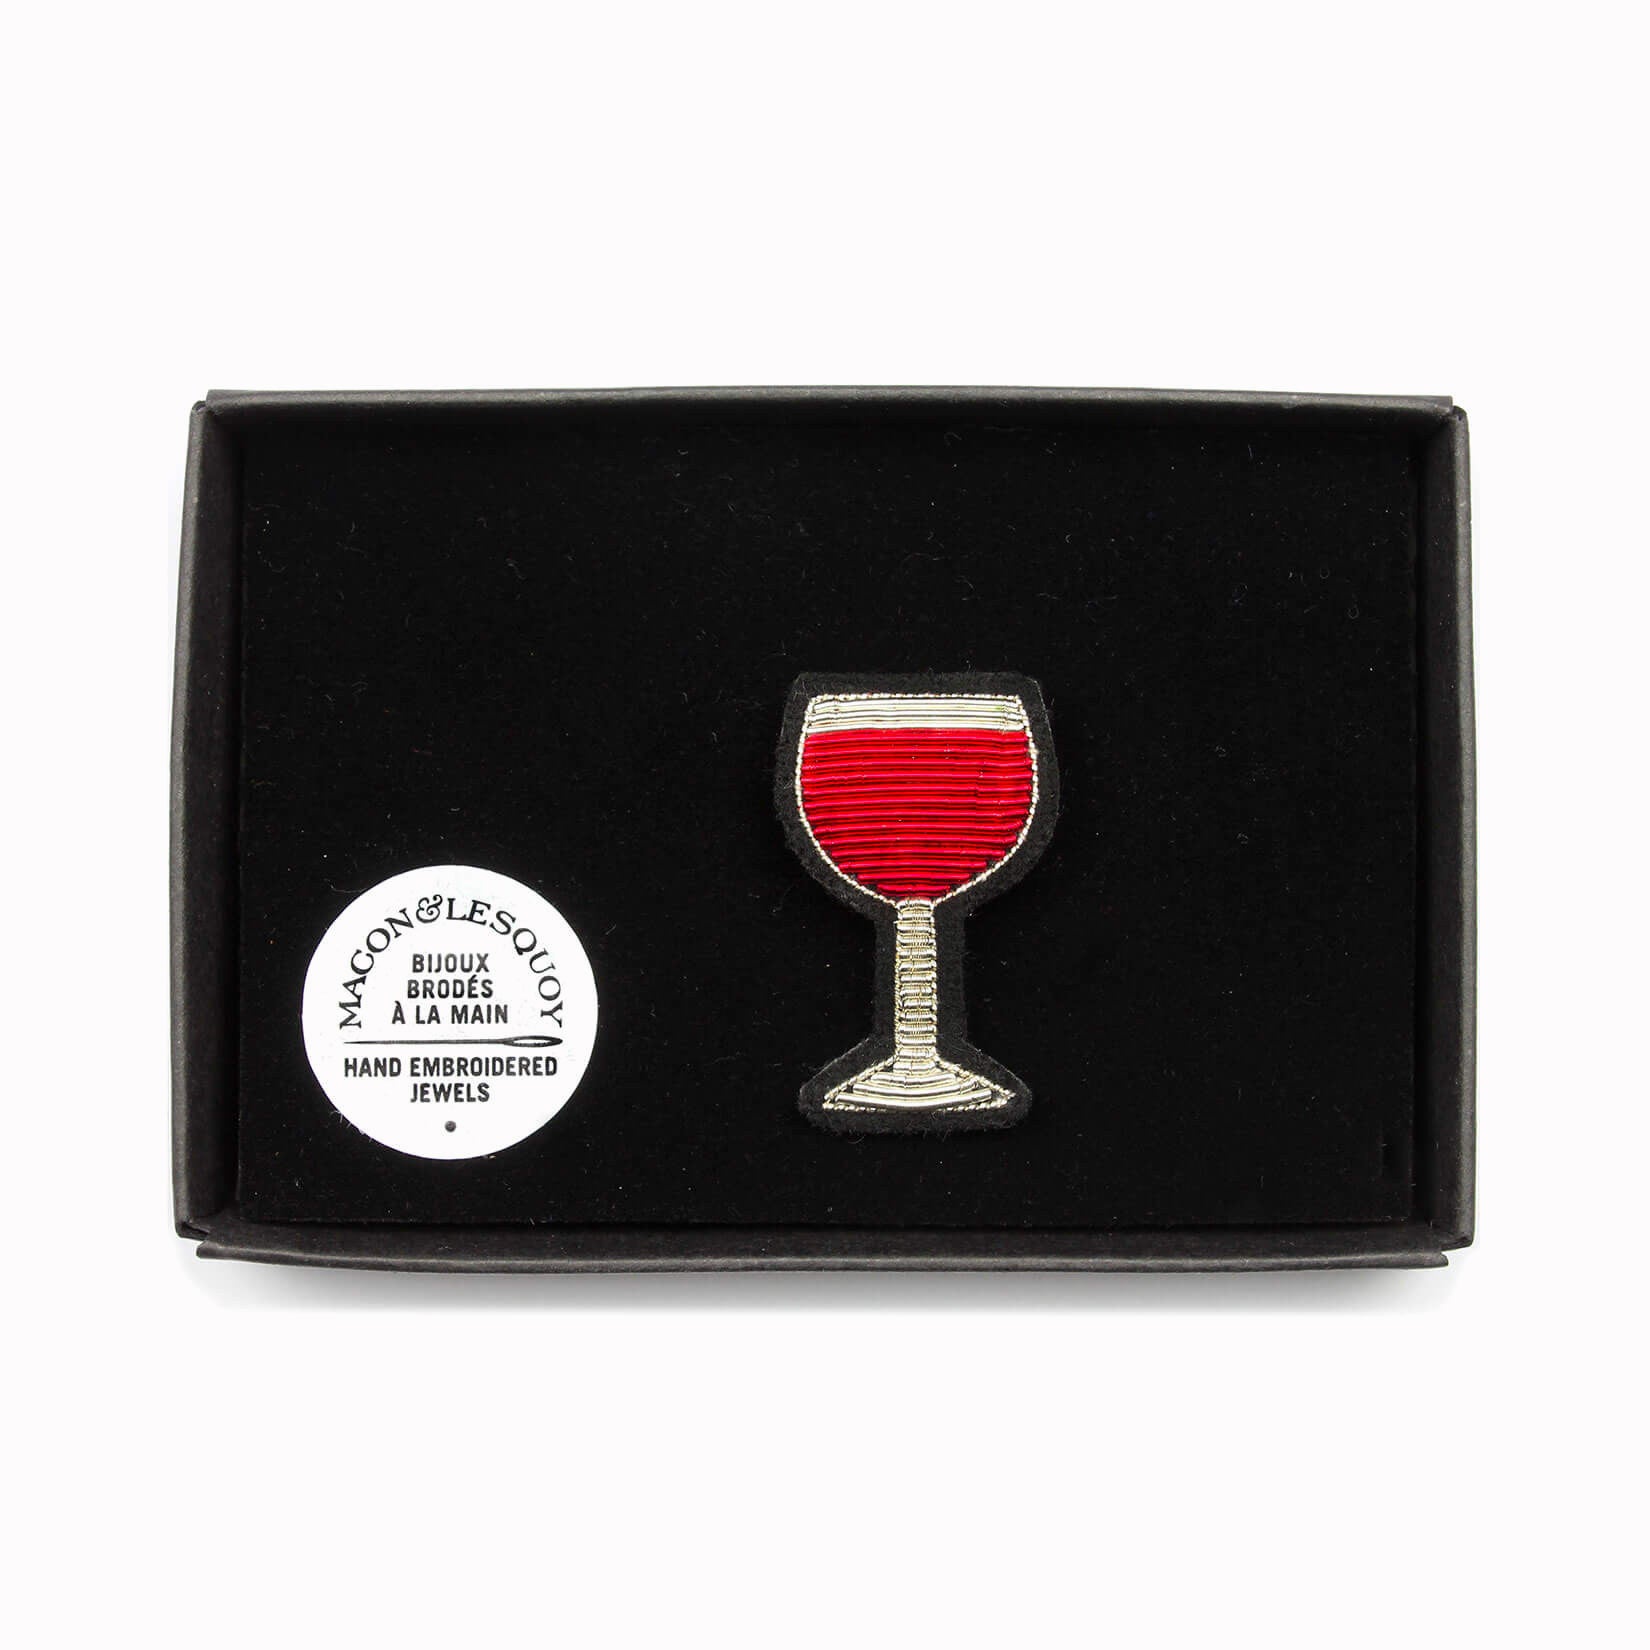 Hand embroidered lapel pin for epicureans and wine lovers in a presentation box From Macon & Lesquoy, French Hand Embroidered badges and patches using Cannetille thread.